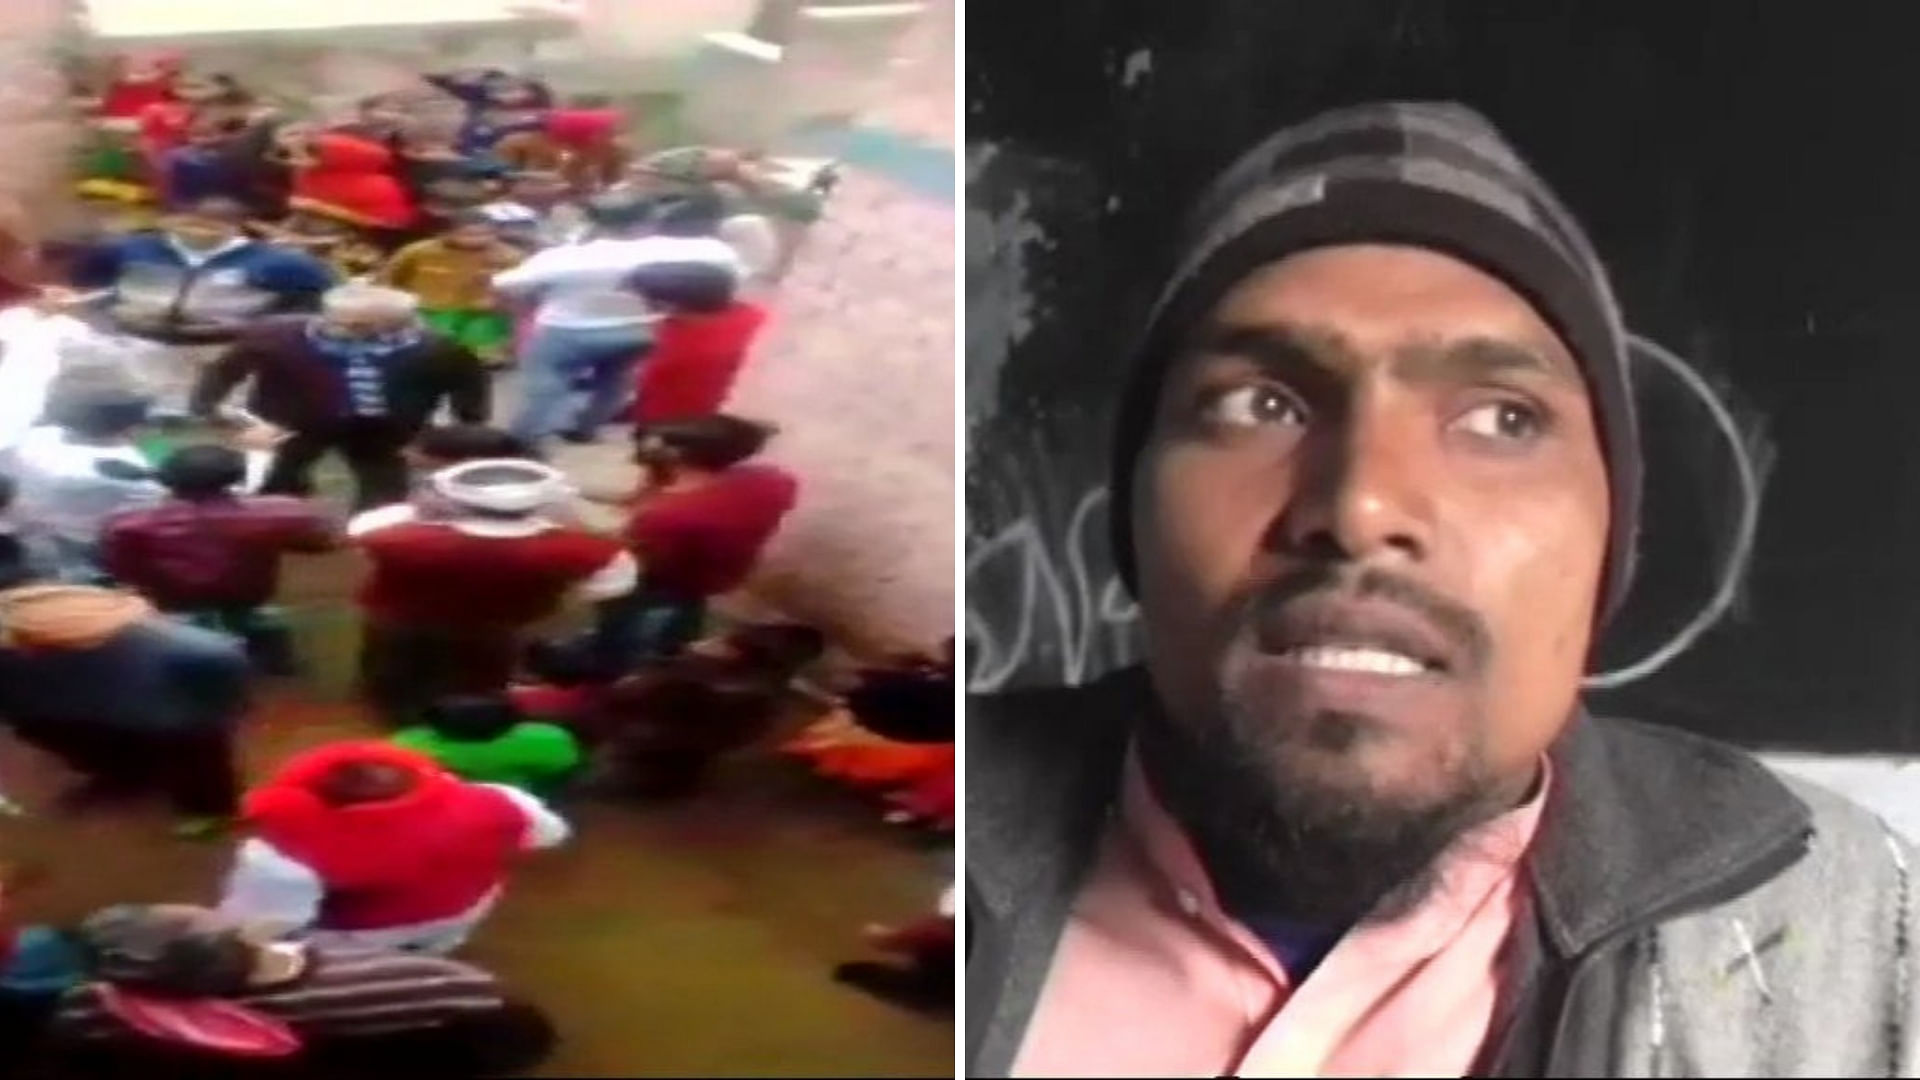 The video of the incident has apparently gone viral on social media after which Hussain too stated that he had not said ‘Vande Mataram’ because it is considered against his religious belief.